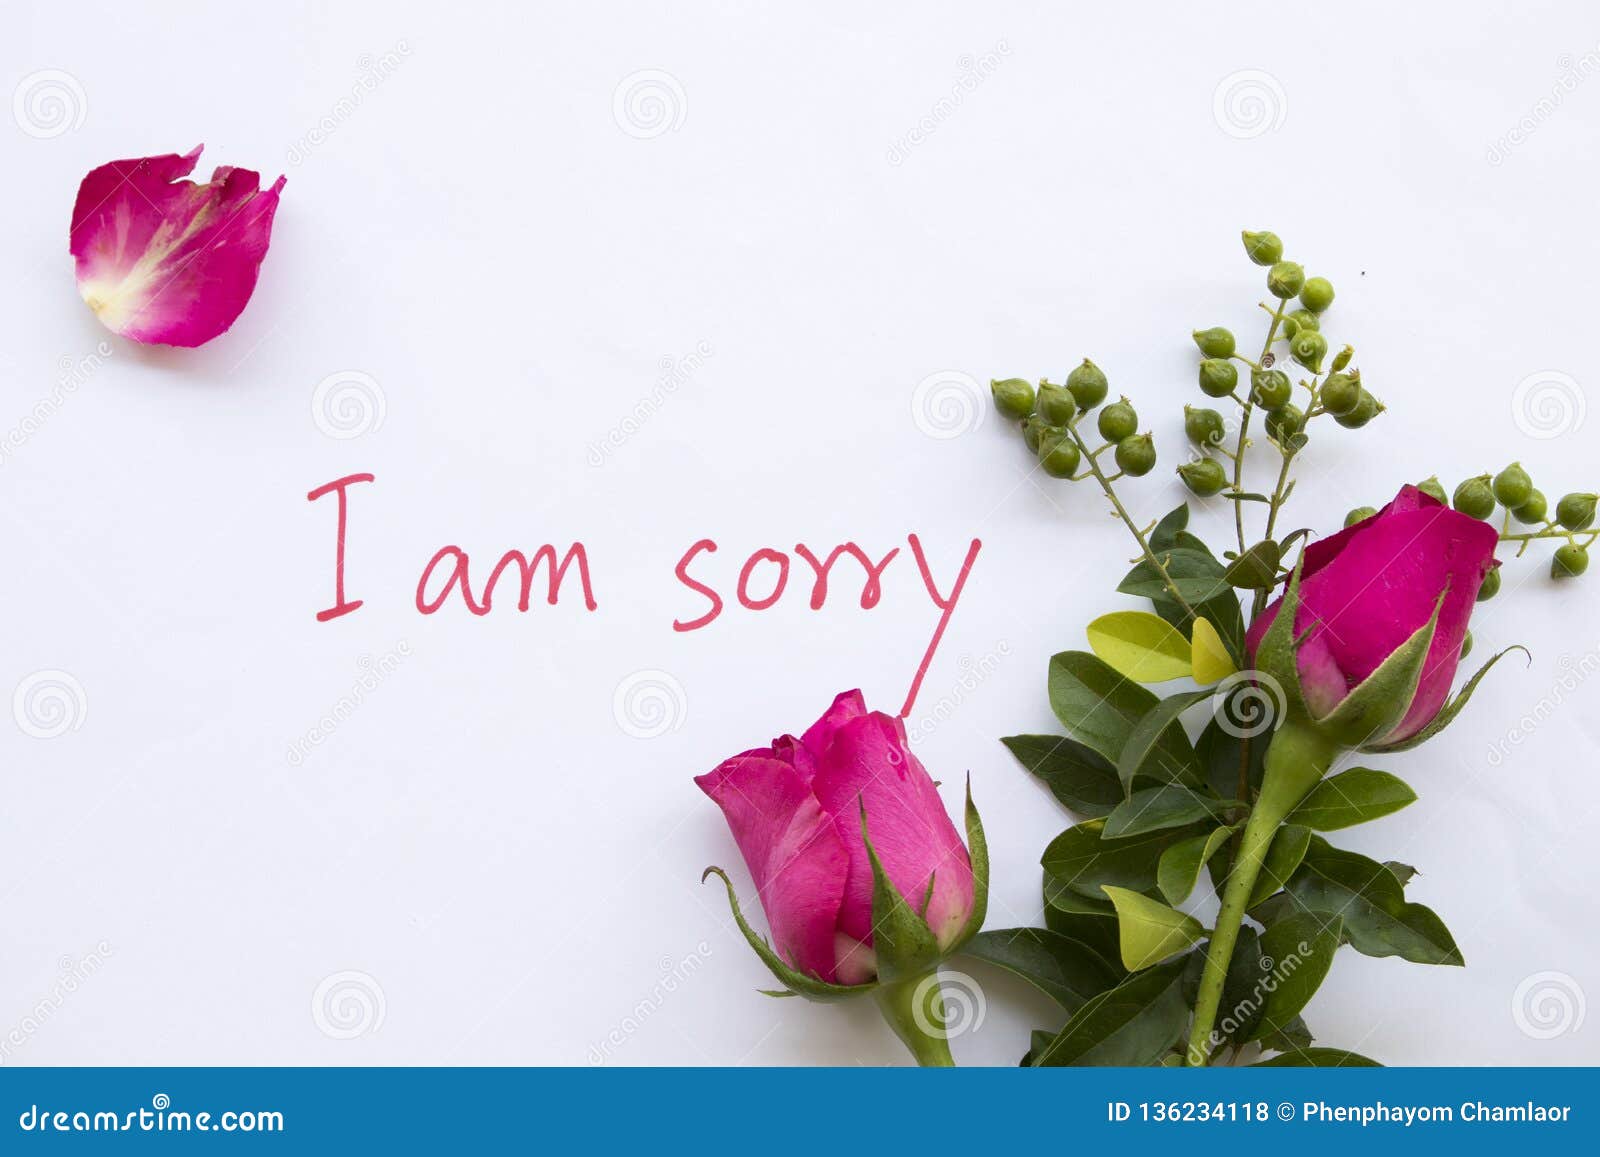 I am Sorry Message Card with Pink Rose Stock Photo - Image of ...